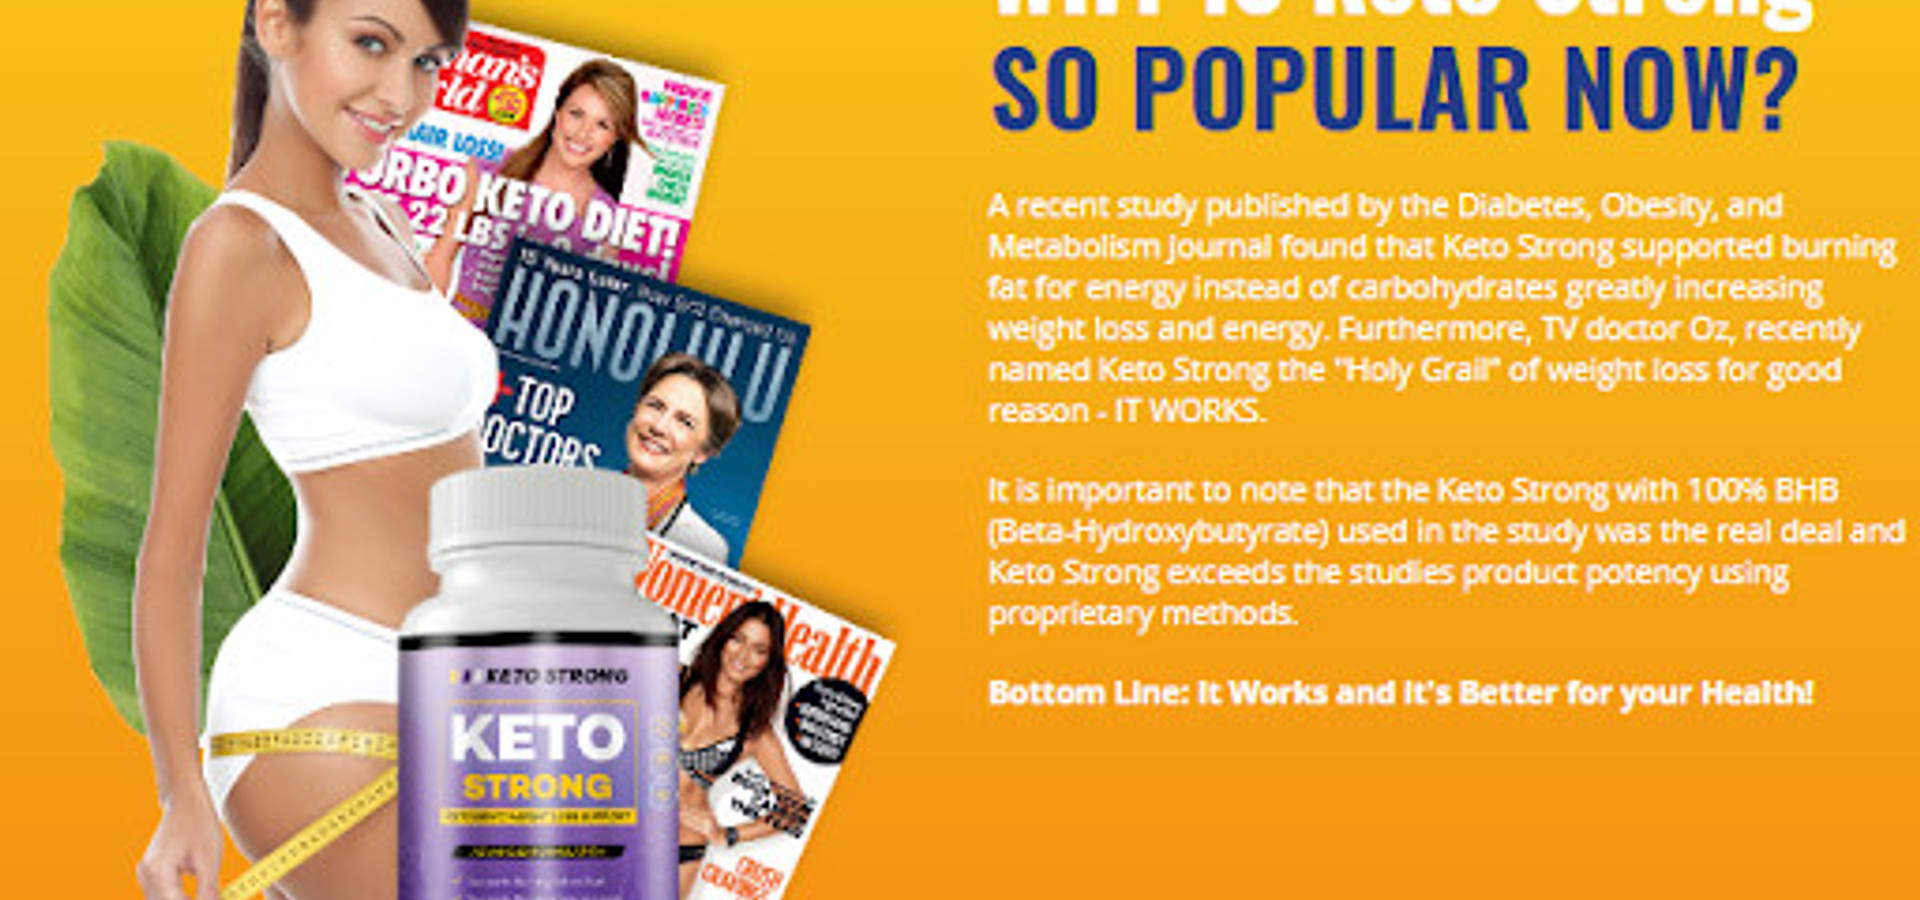 Keto Strong - Fat Loss Benefits, Price, Results And Ingredients | homify